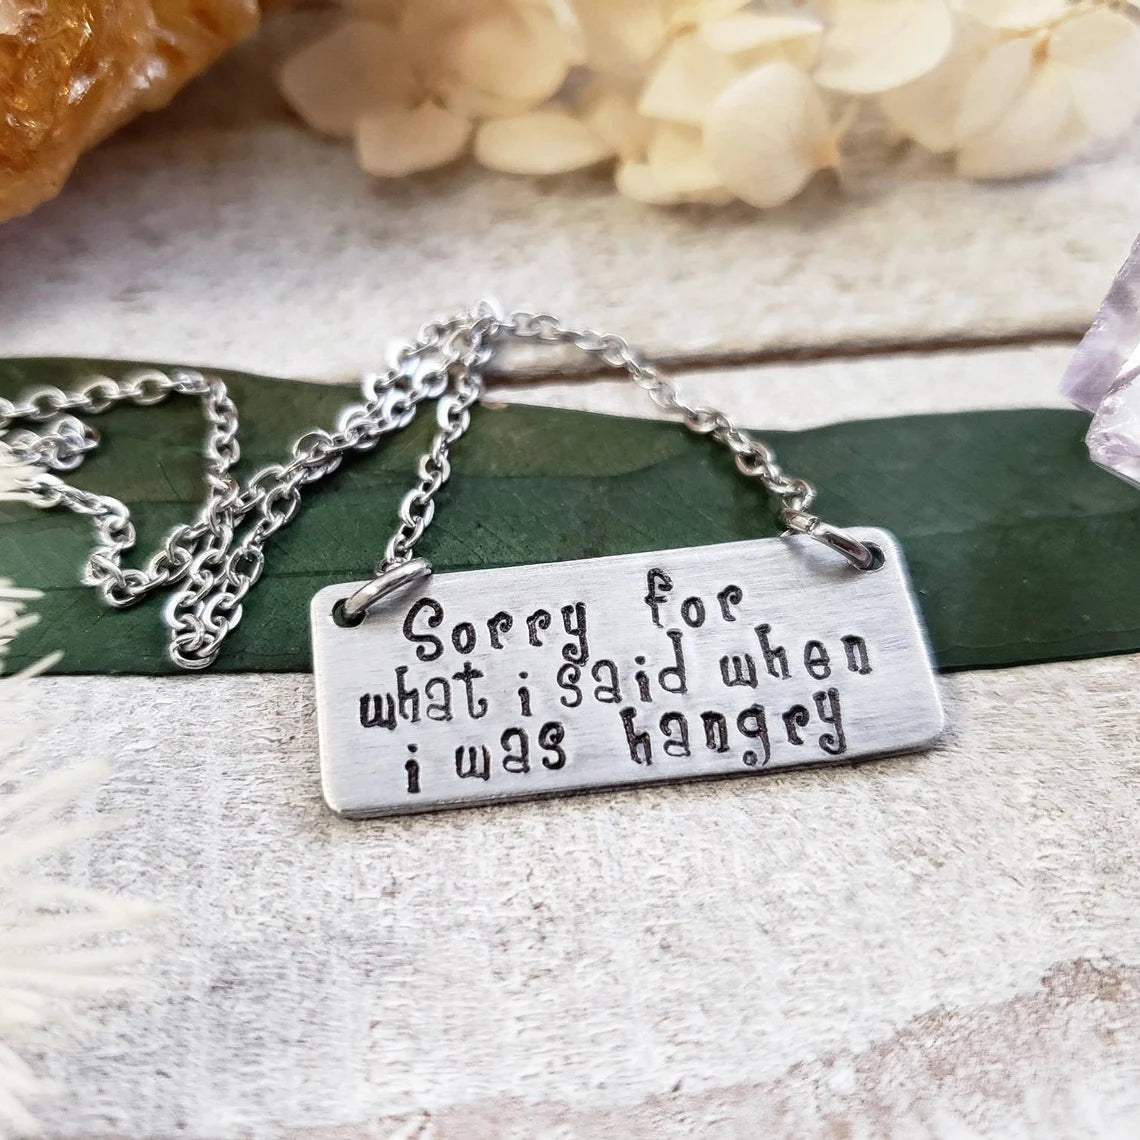 Hangry necklace